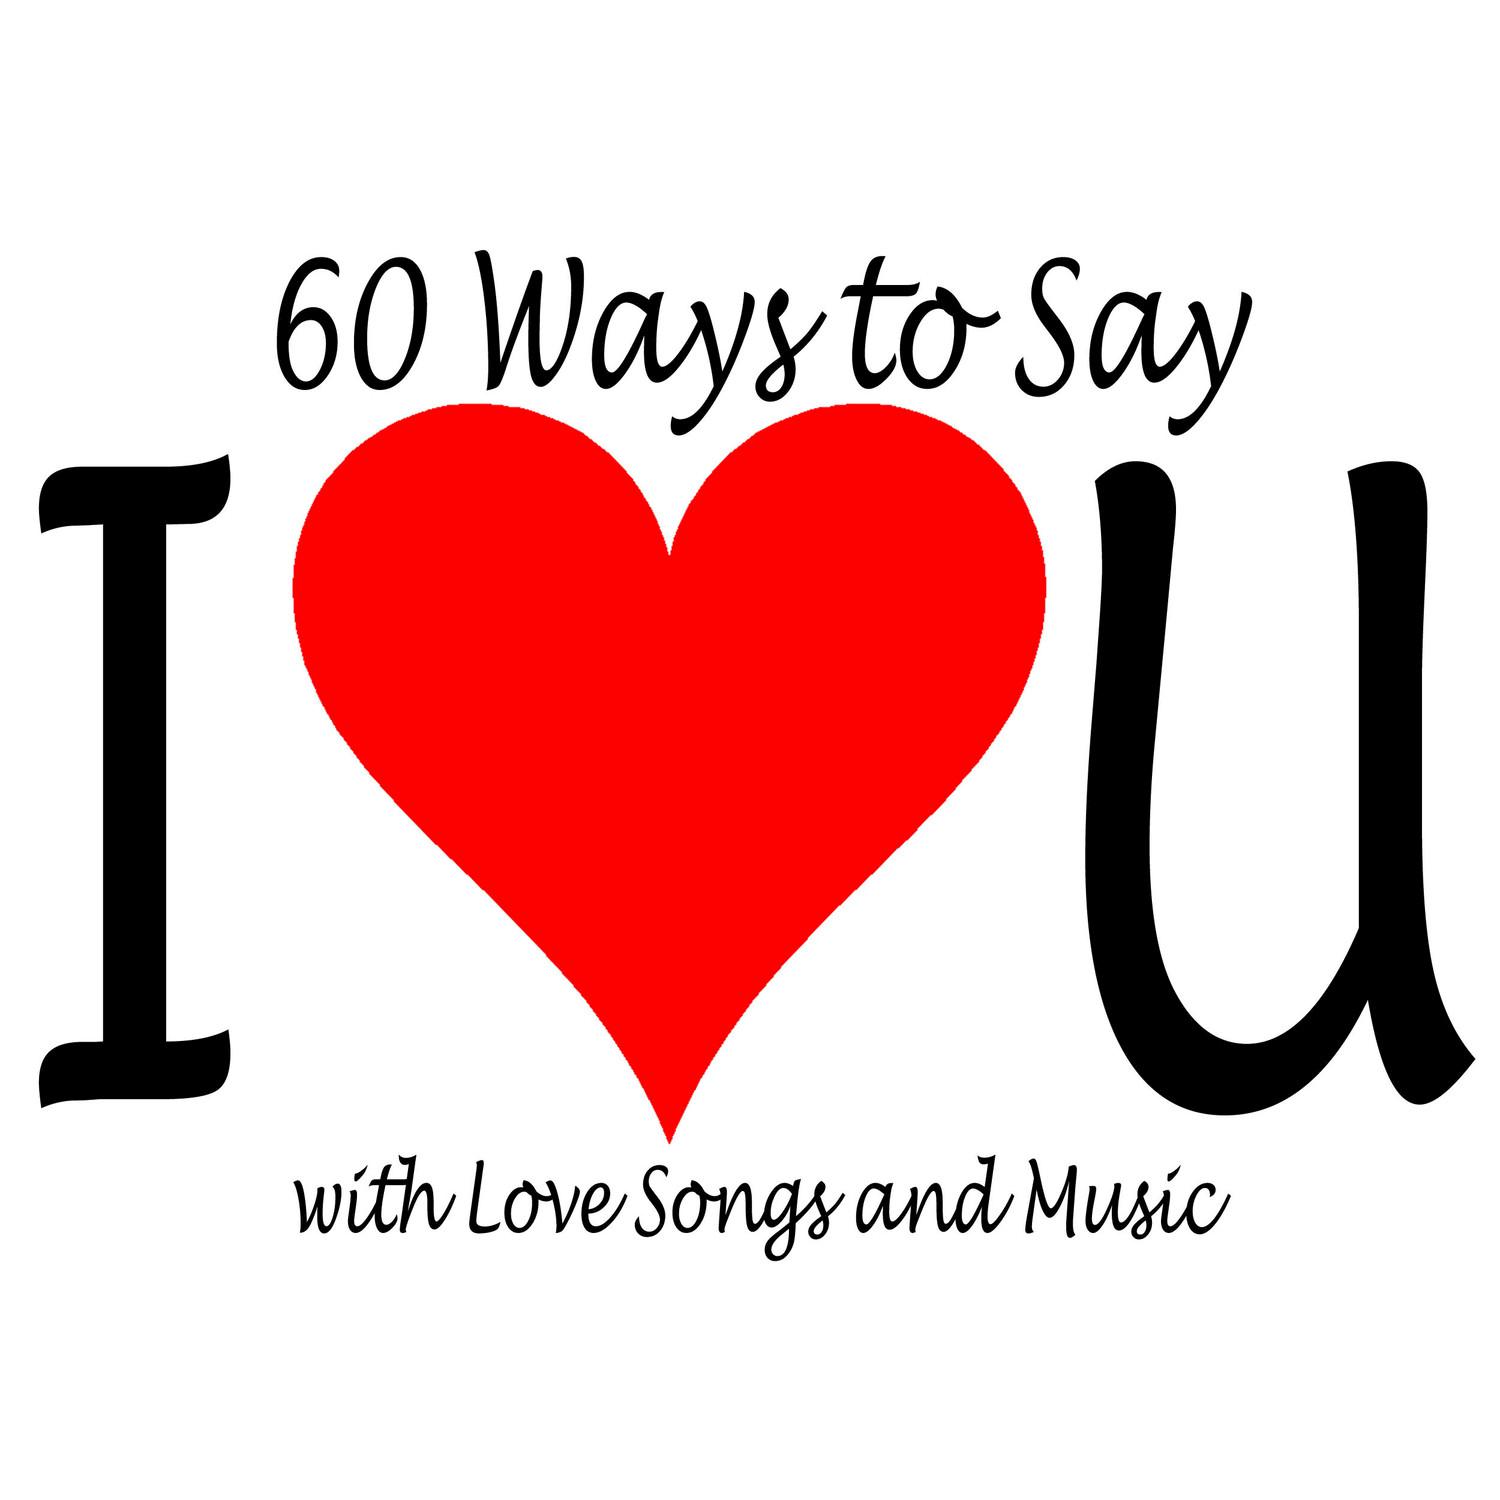 60 Ways to Say I Love You with Love Songs and Music